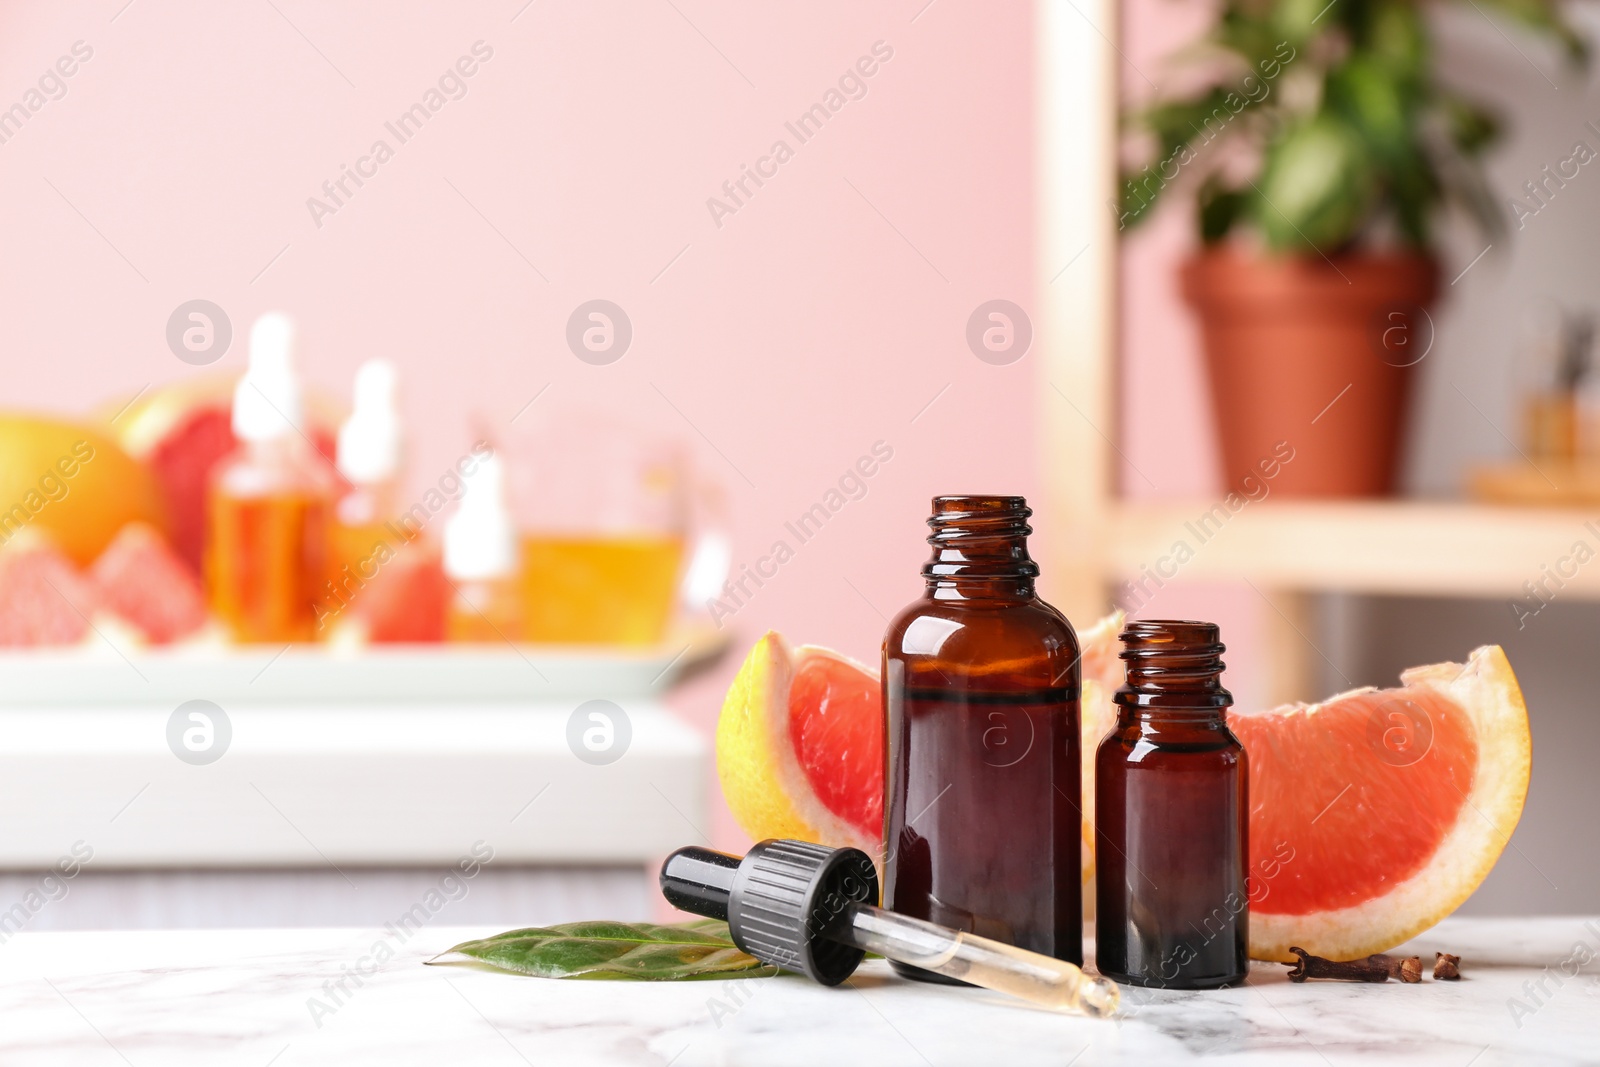 Photo of Bottles of essential oil and grapefruit slices on table against blurred background. Space for text